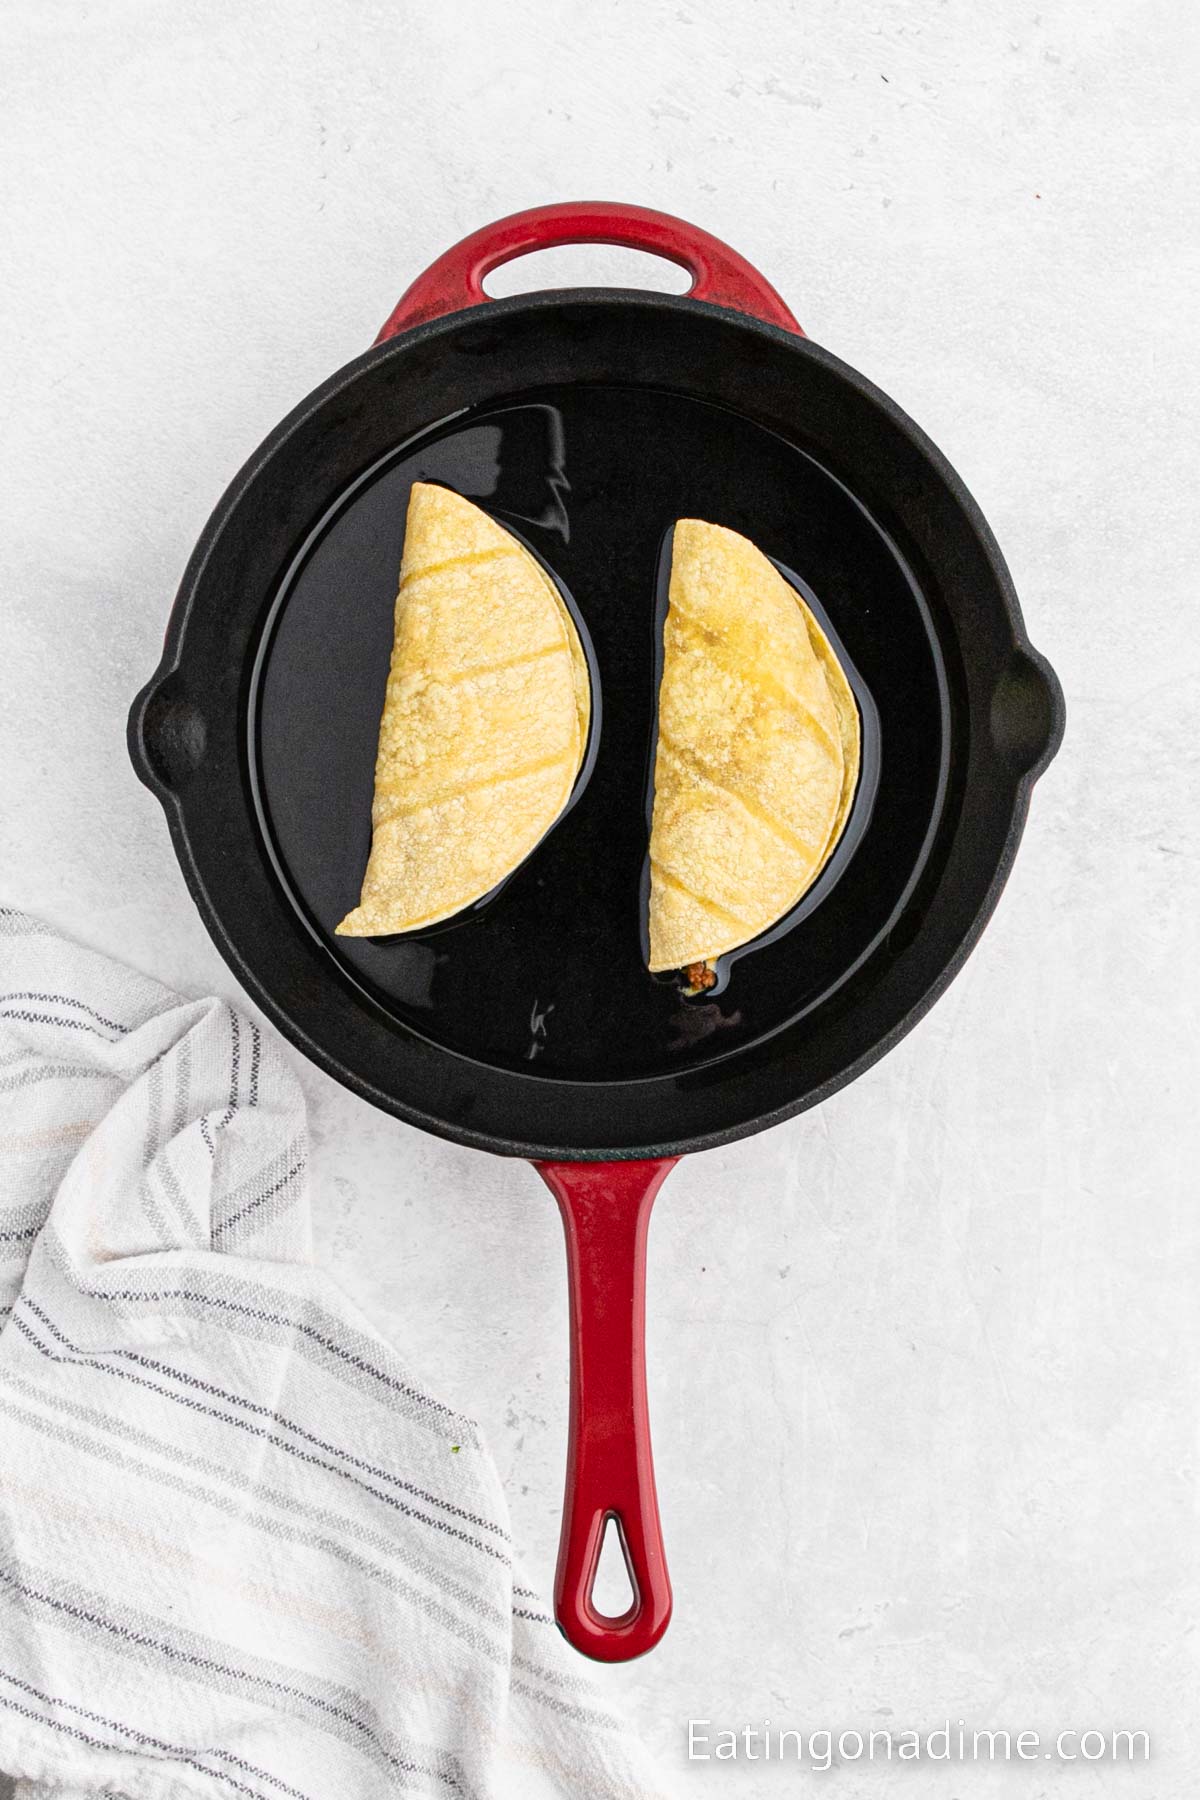 Frying tacos in a skillet